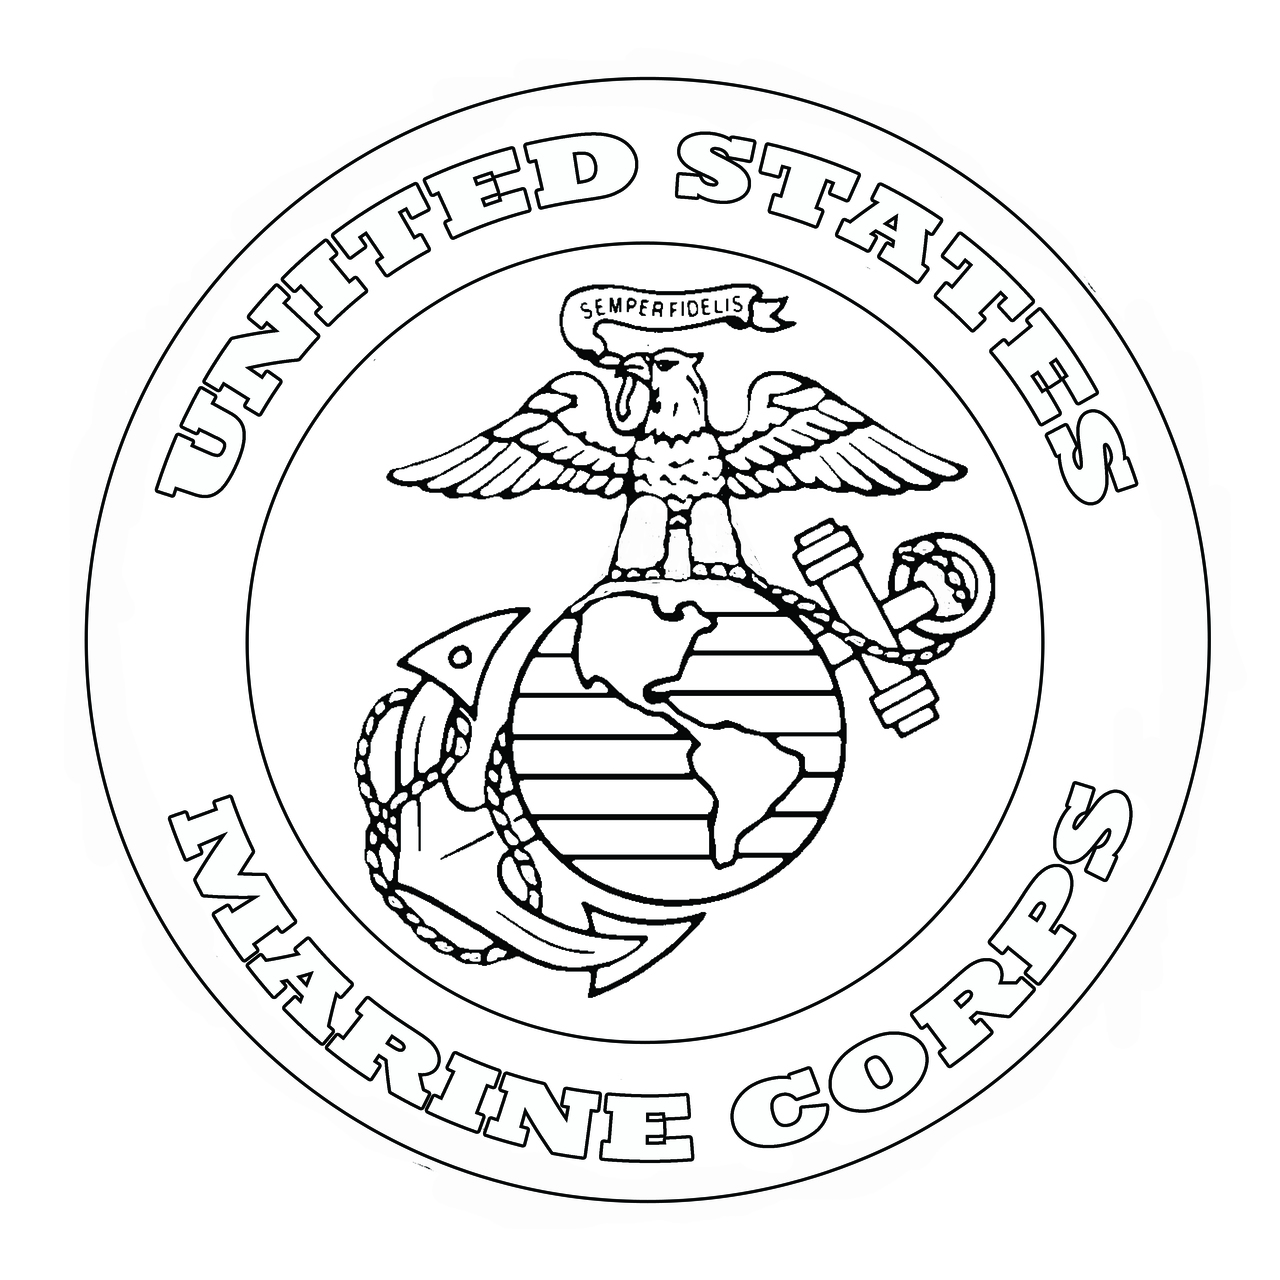 Printable Marine Corps Coloring Pages